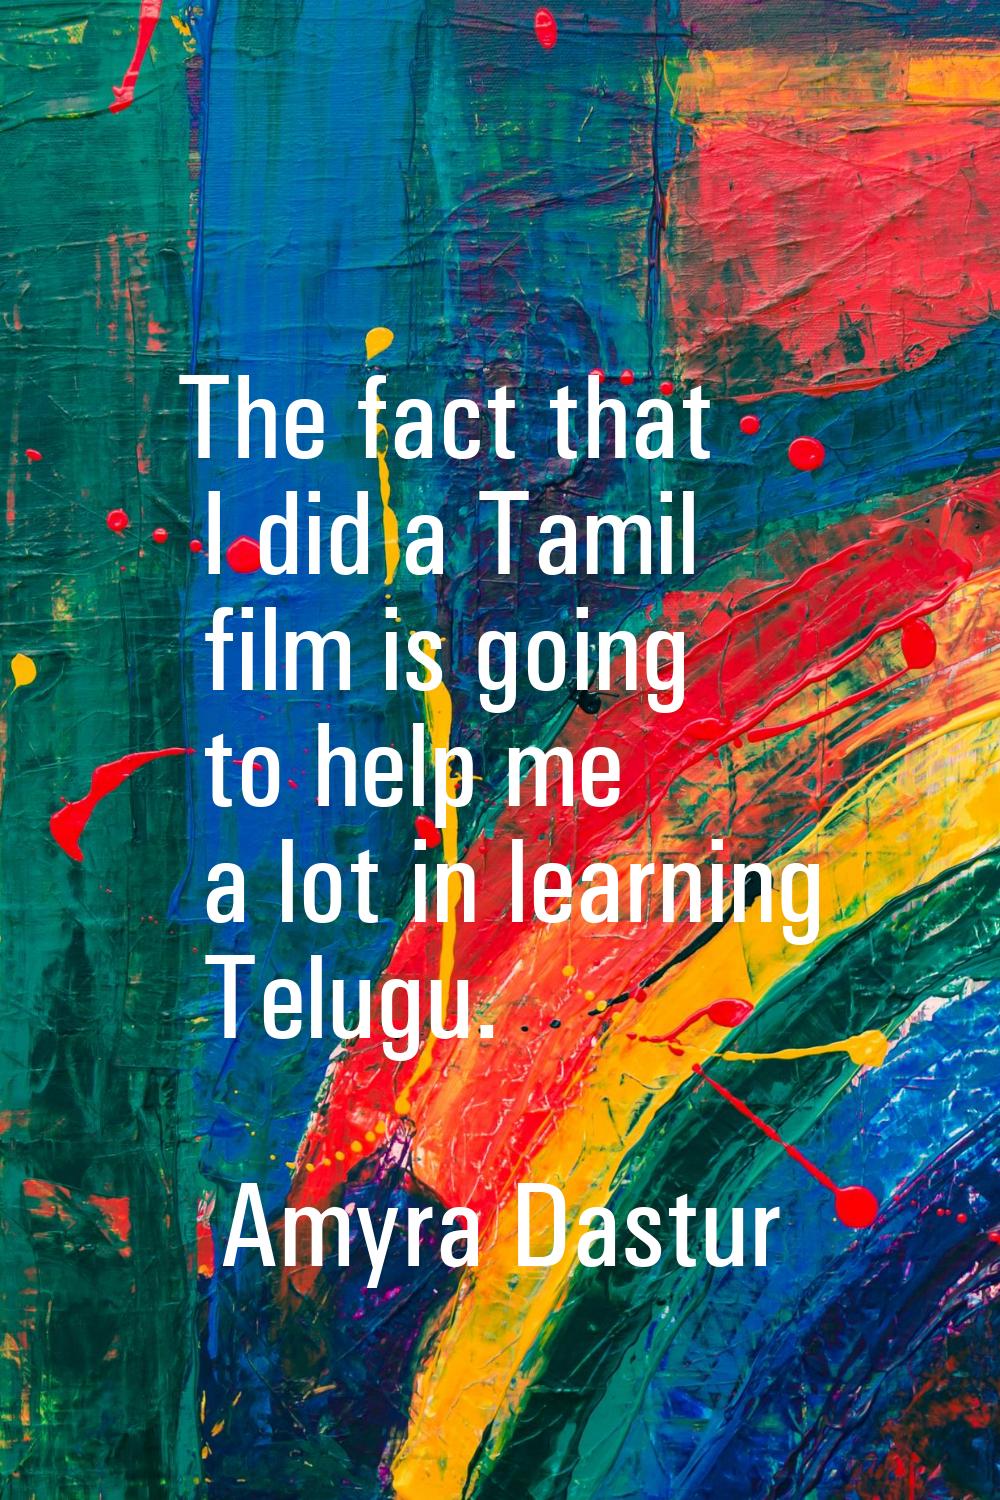 The fact that I did a Tamil film is going to help me a lot in learning Telugu.